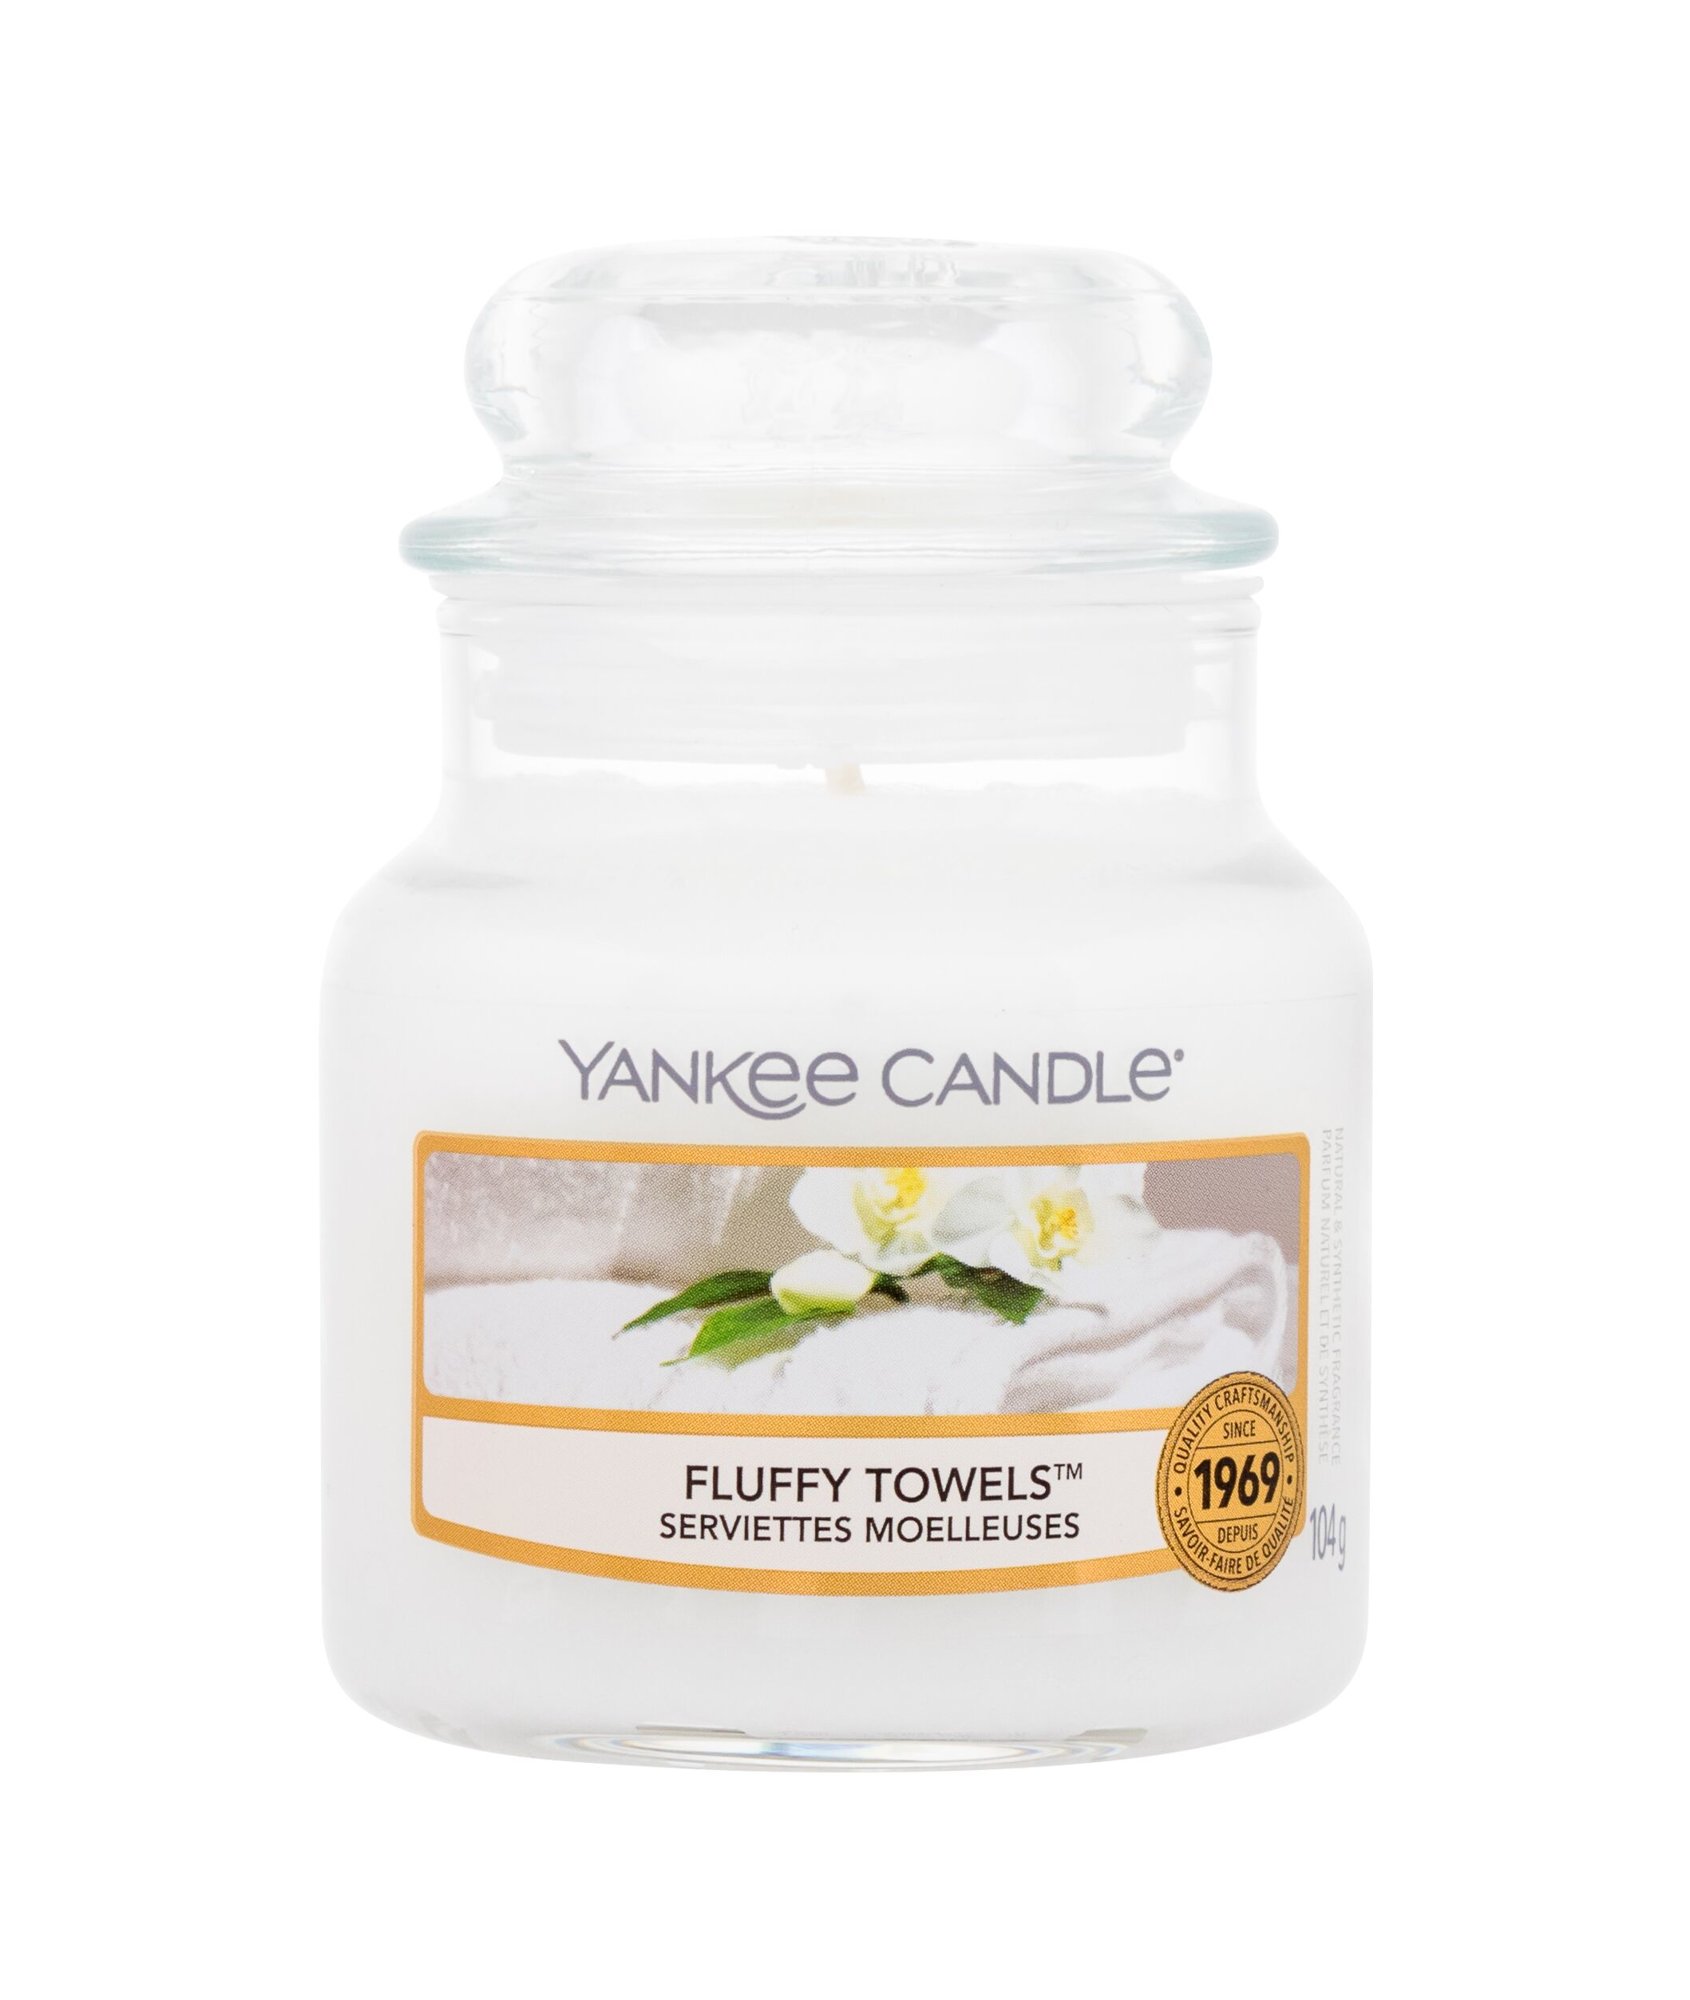 Yankee Candle Fluffy Towels 104g Kvepalai Unisex Scented Candle